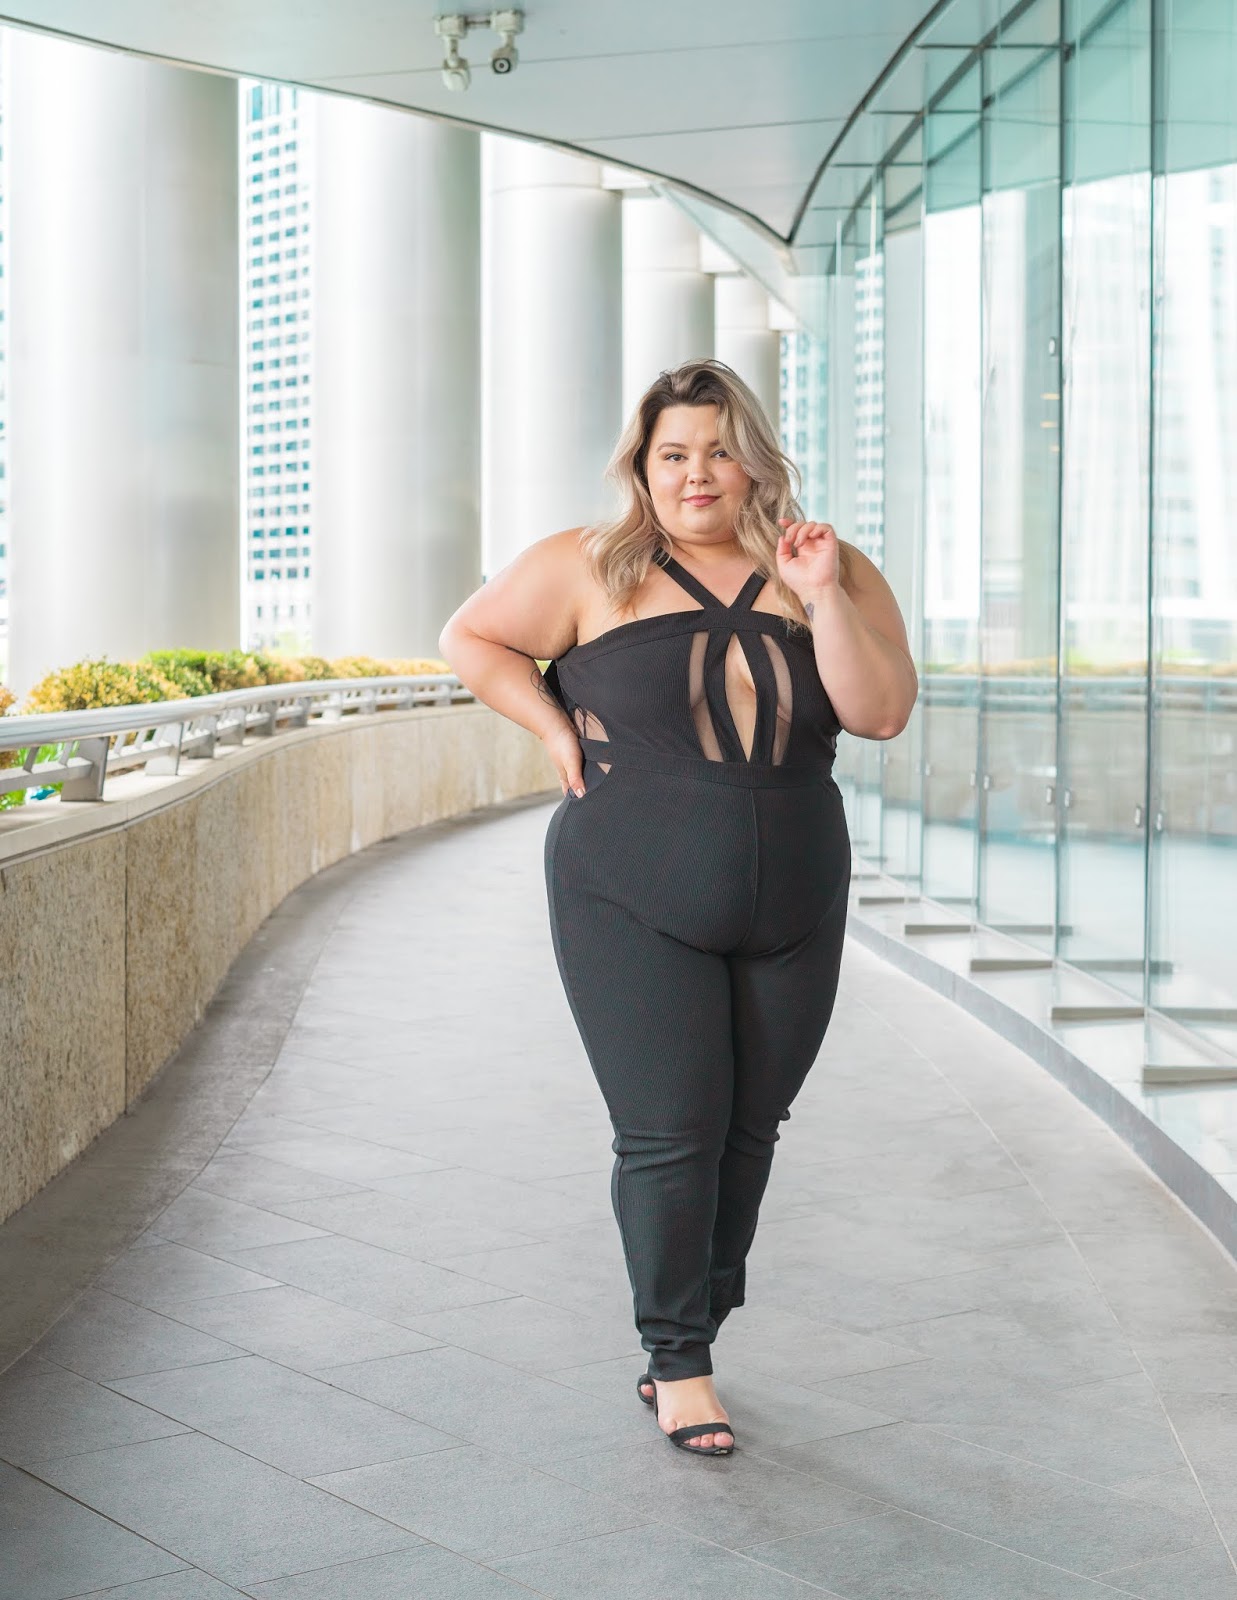 Chicago Plus Size Petite Fashion Blogger, YouTuber, and model Natalie Craig, of Natalie in the City, review's Fashion Nova's jumpsuits.